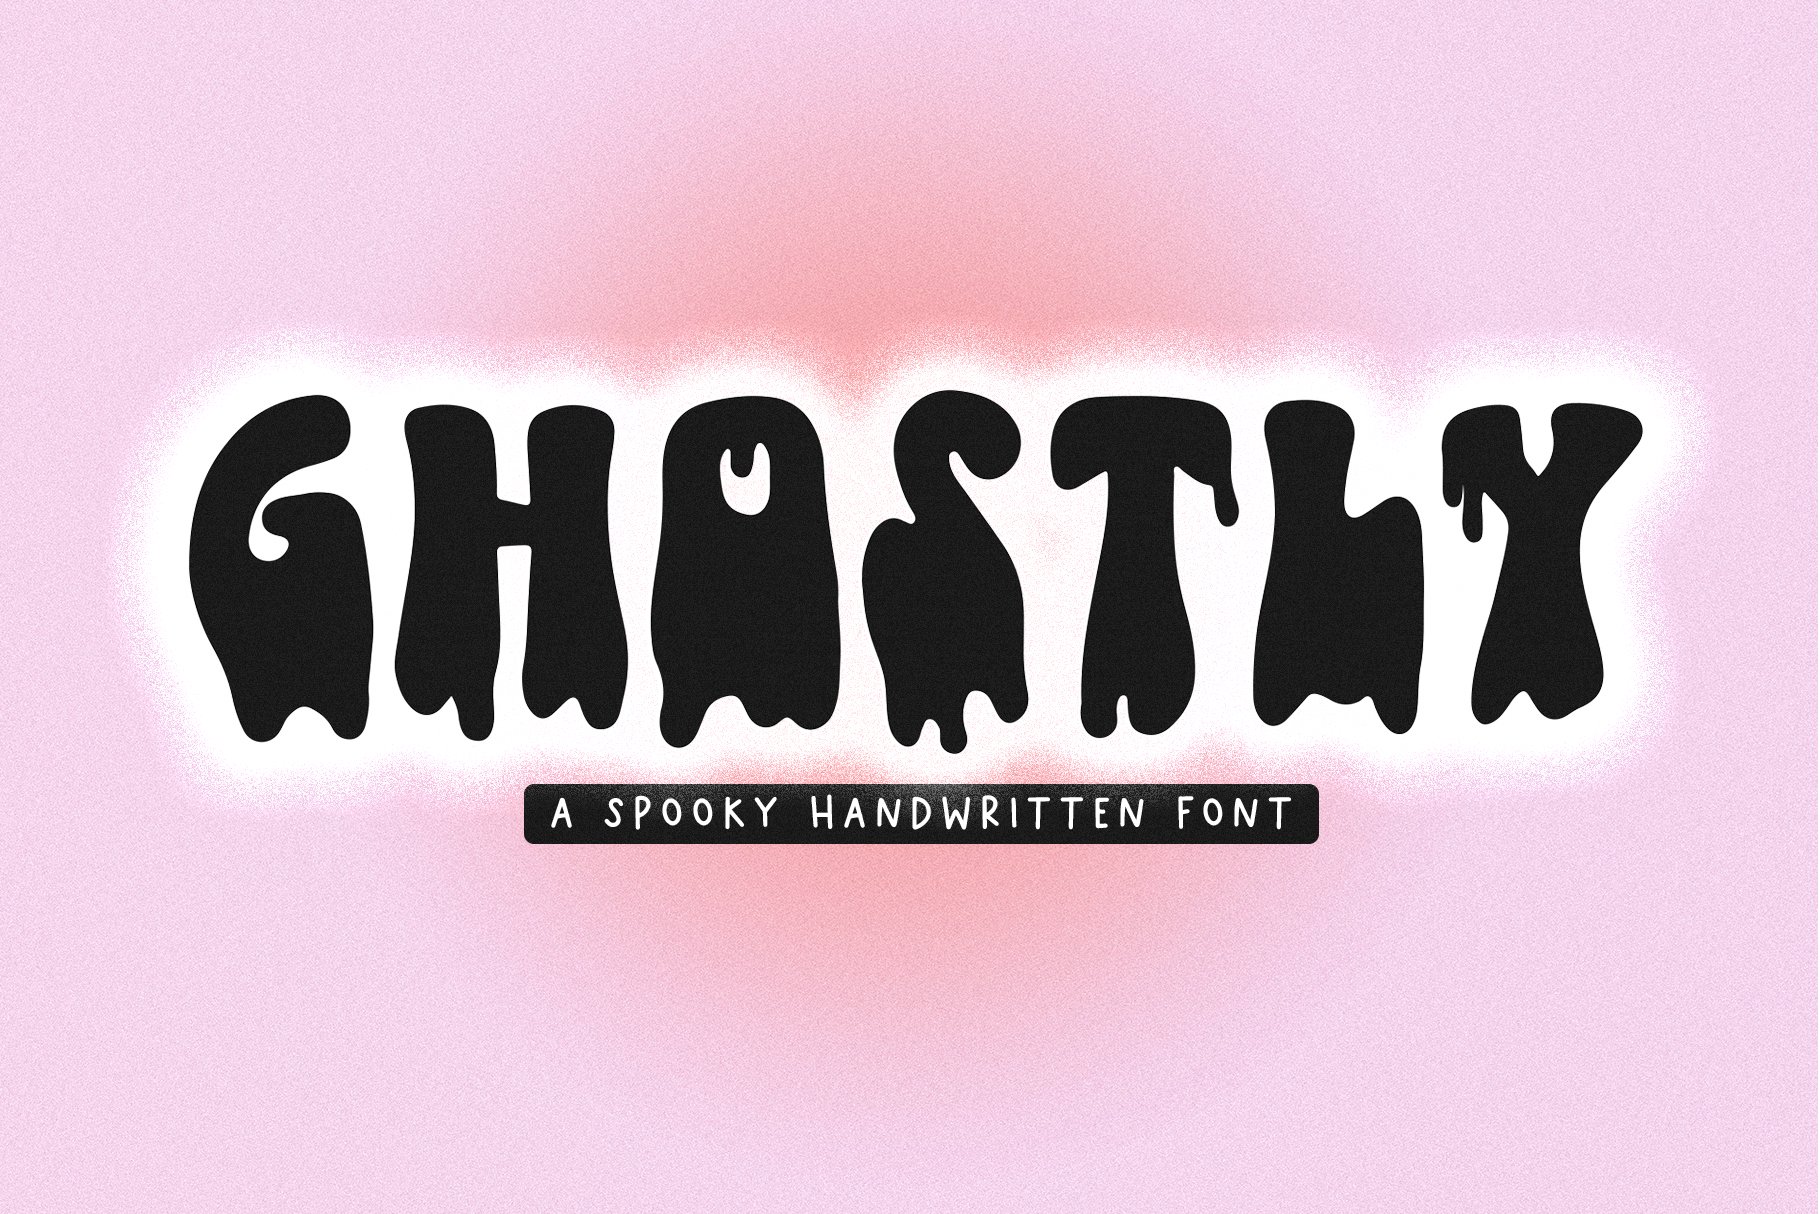 Ghostly | Dripping Halloween Font cover image.